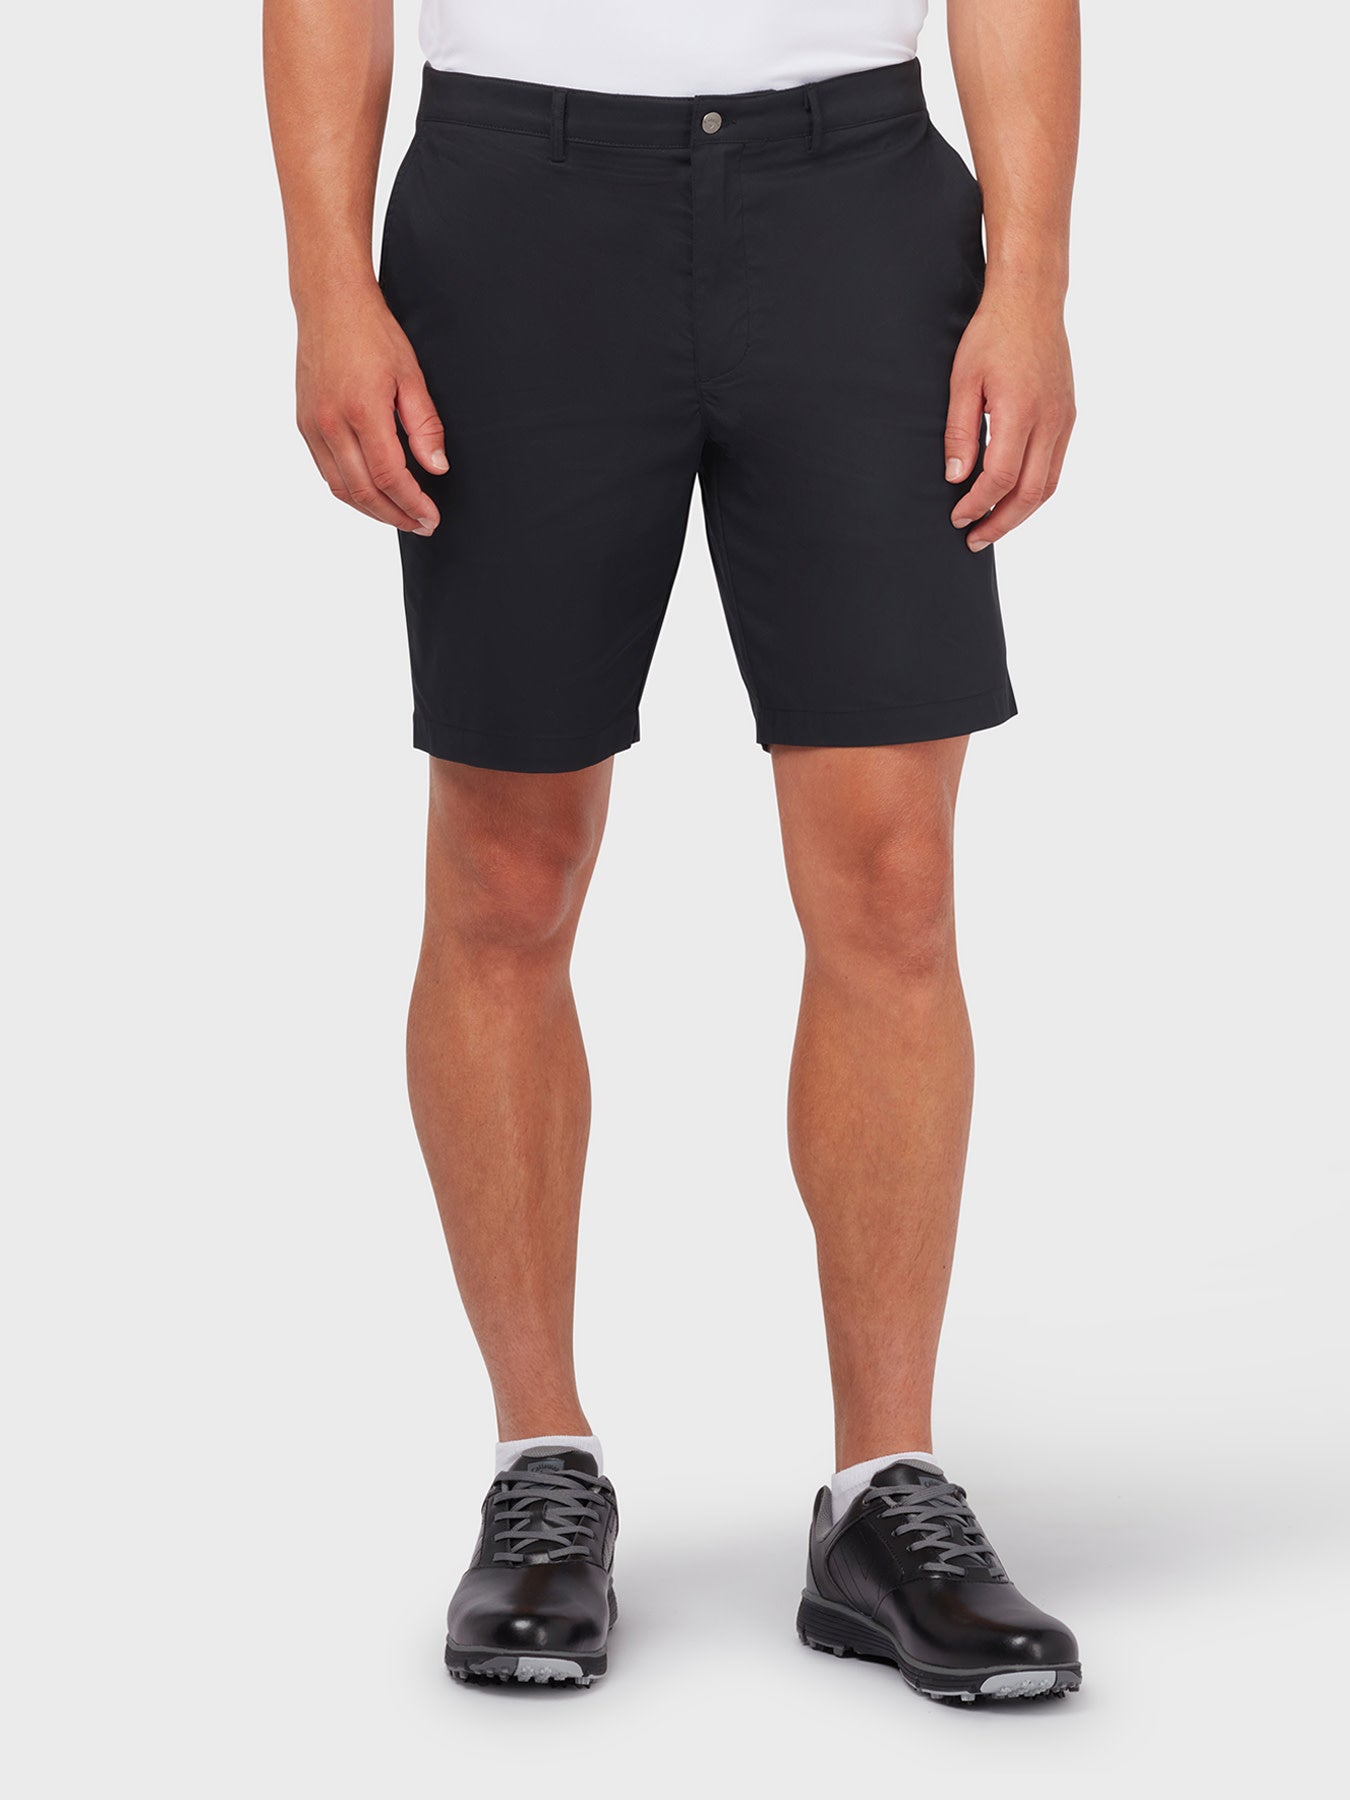 View X Series Flat Fronted Short In Caviar Caviar 38 information